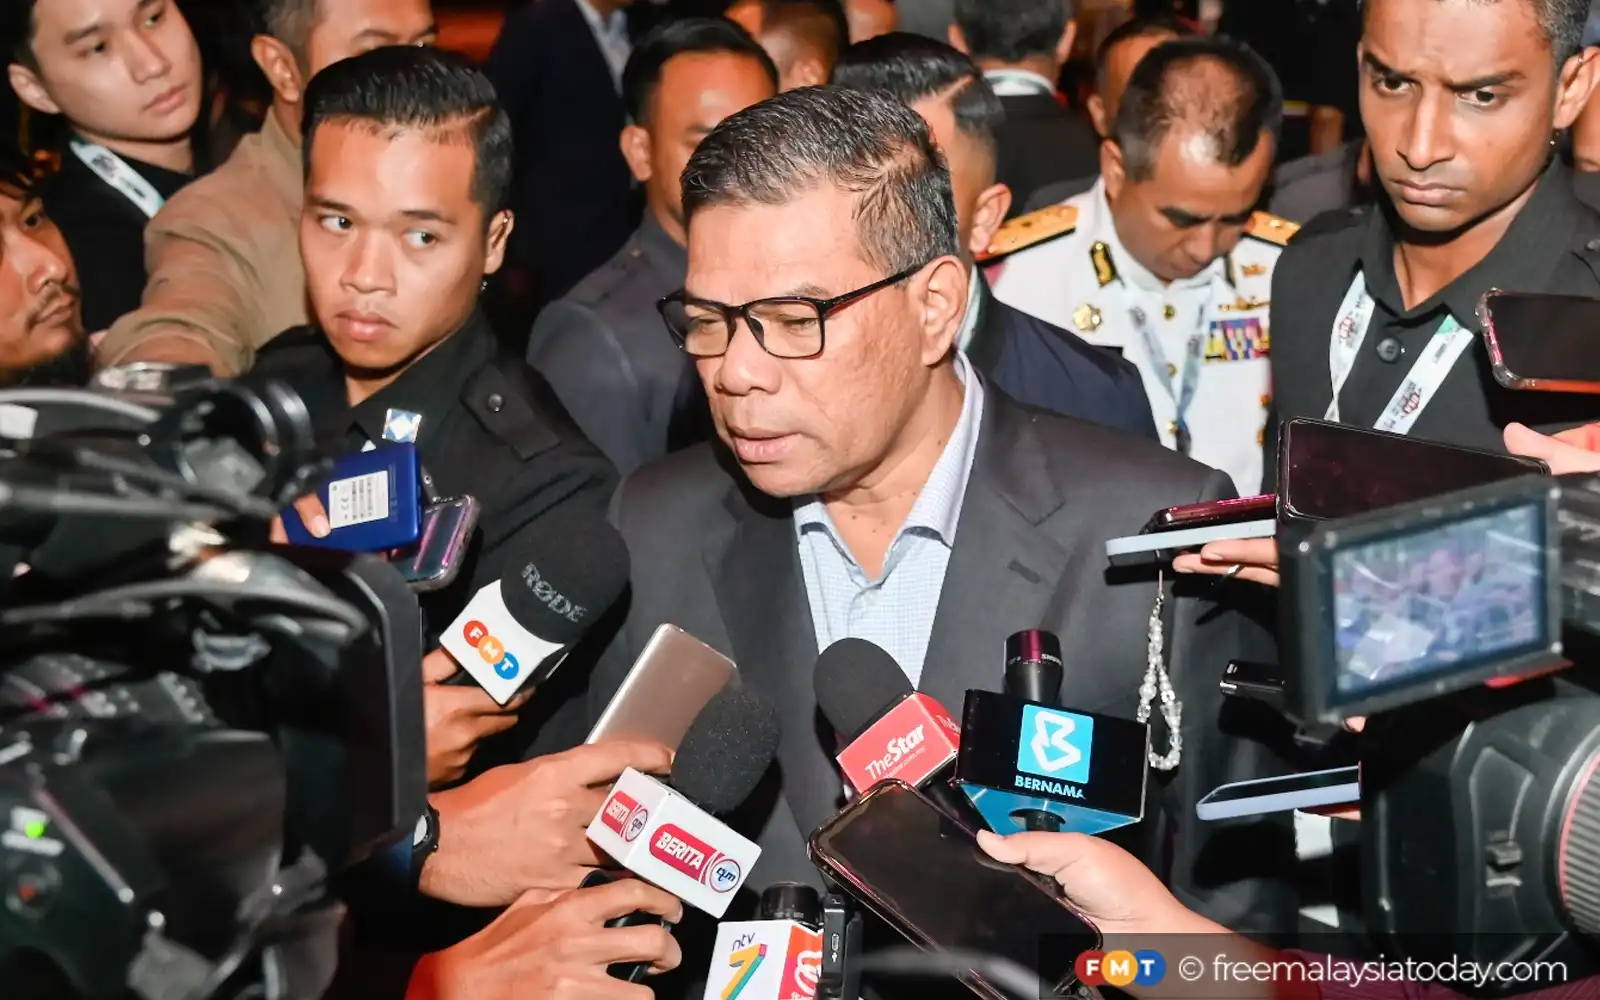 saifuddin to explain malaysia’s stance on issues raised by top us official